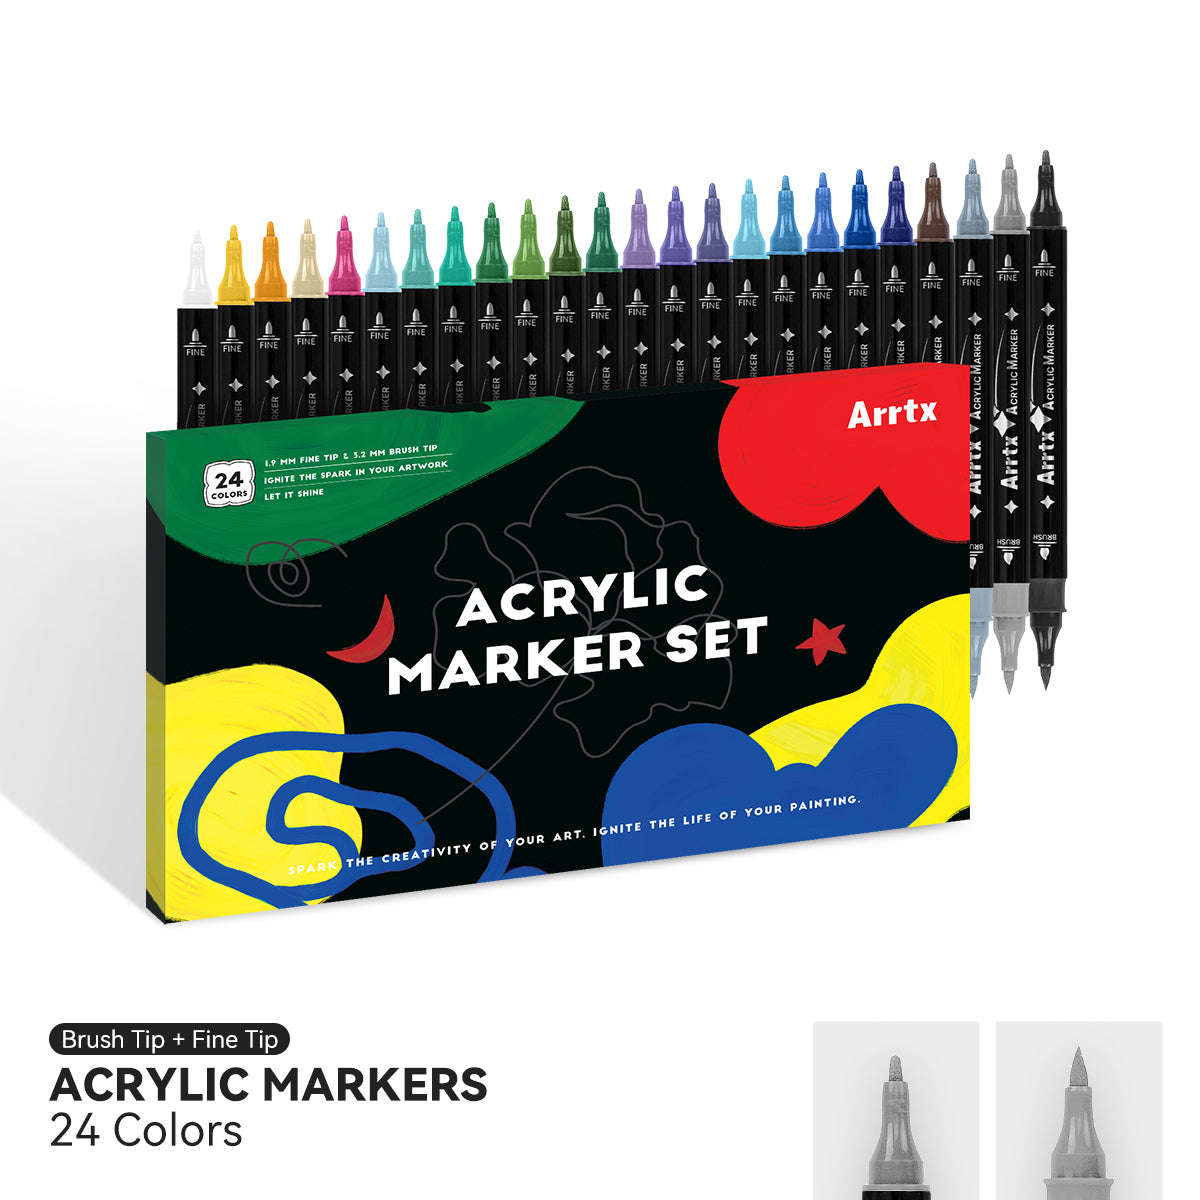 Arrtx 24 Colors Acrylic Marker, Brush Tip and Fine Tip (Dual Tip)